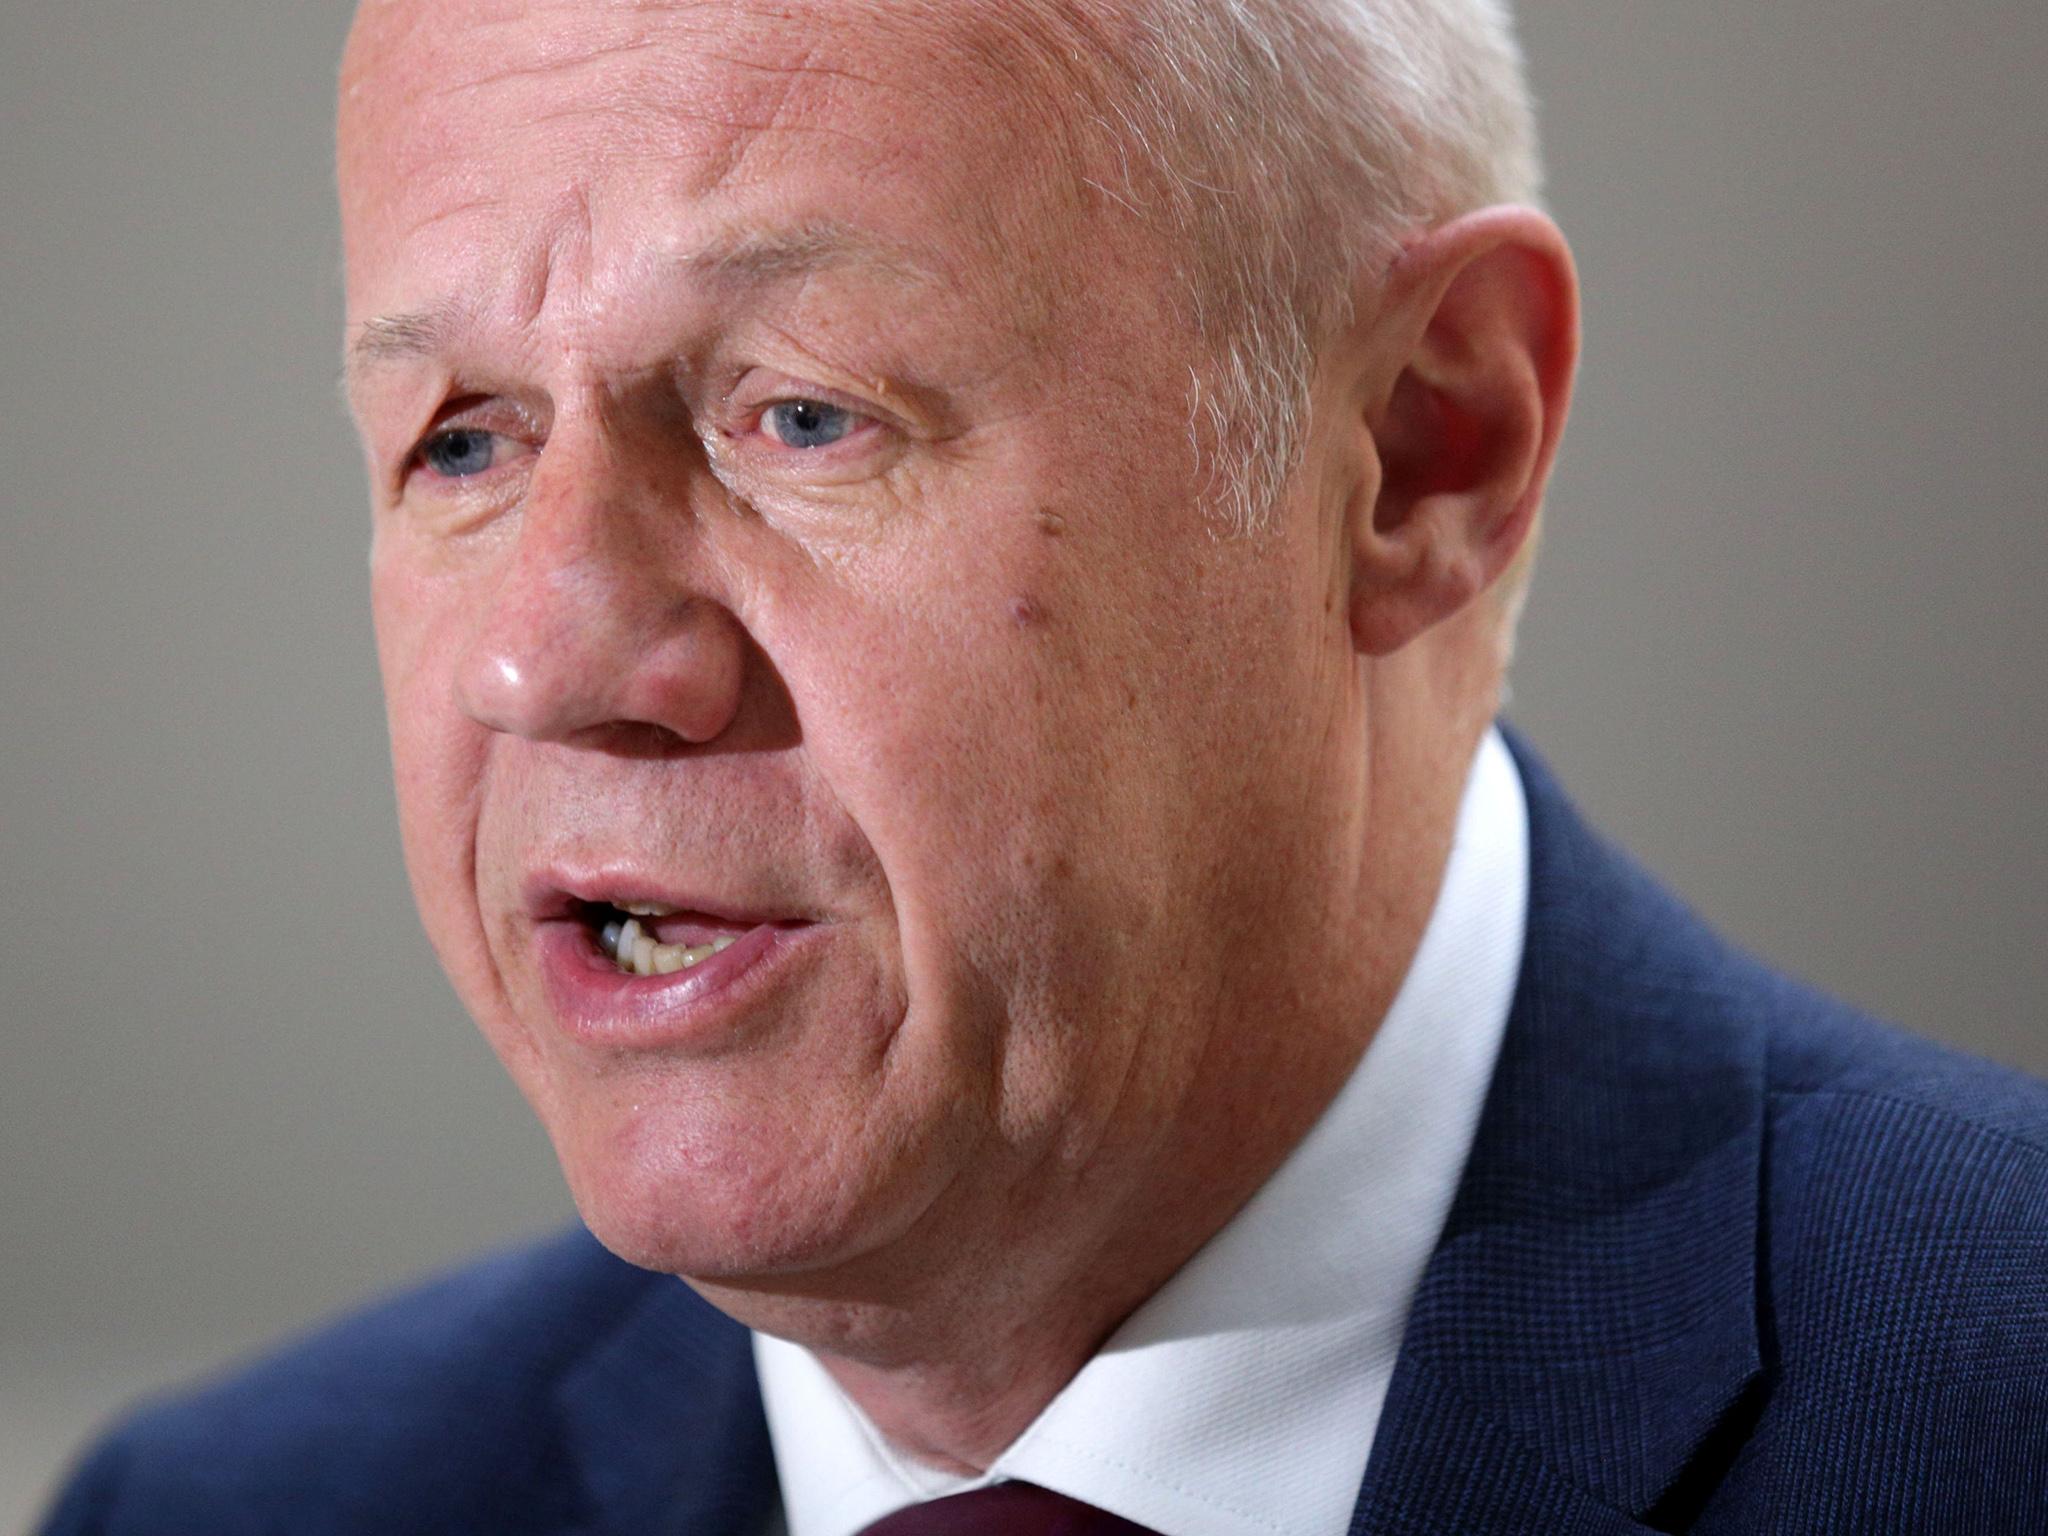 Damian Green has called on the Government to publish the research into Brexit's impact on the UK economy